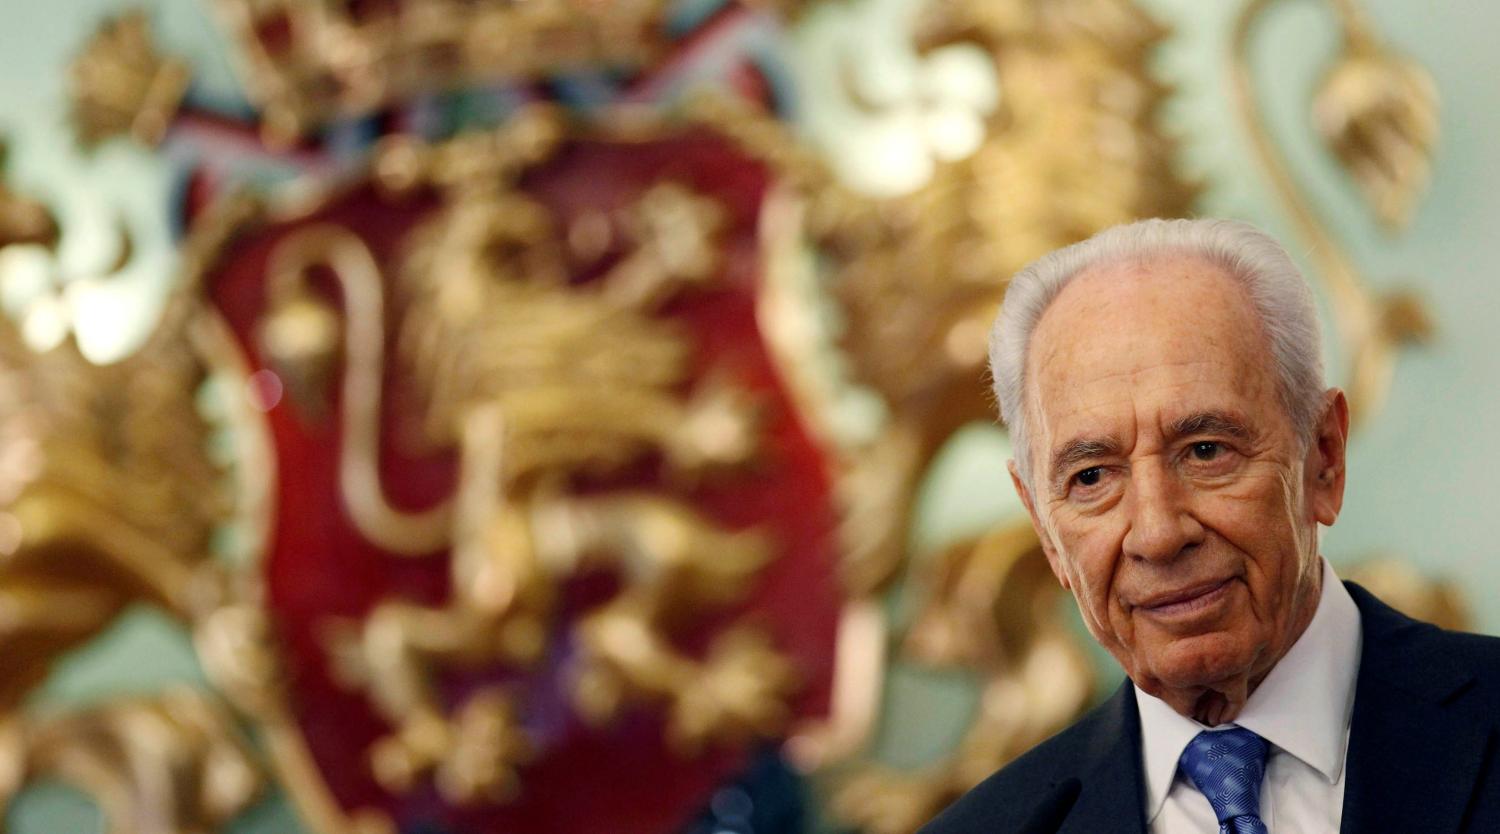 Israeli President Shimon Peres attends a joint news conference with Bulgarian President Georgi Parvanov (not pictured) in Sofia, in this August 11, 2010 file photo. REUTERS/Oleg Popov/Files - RTSPRLD